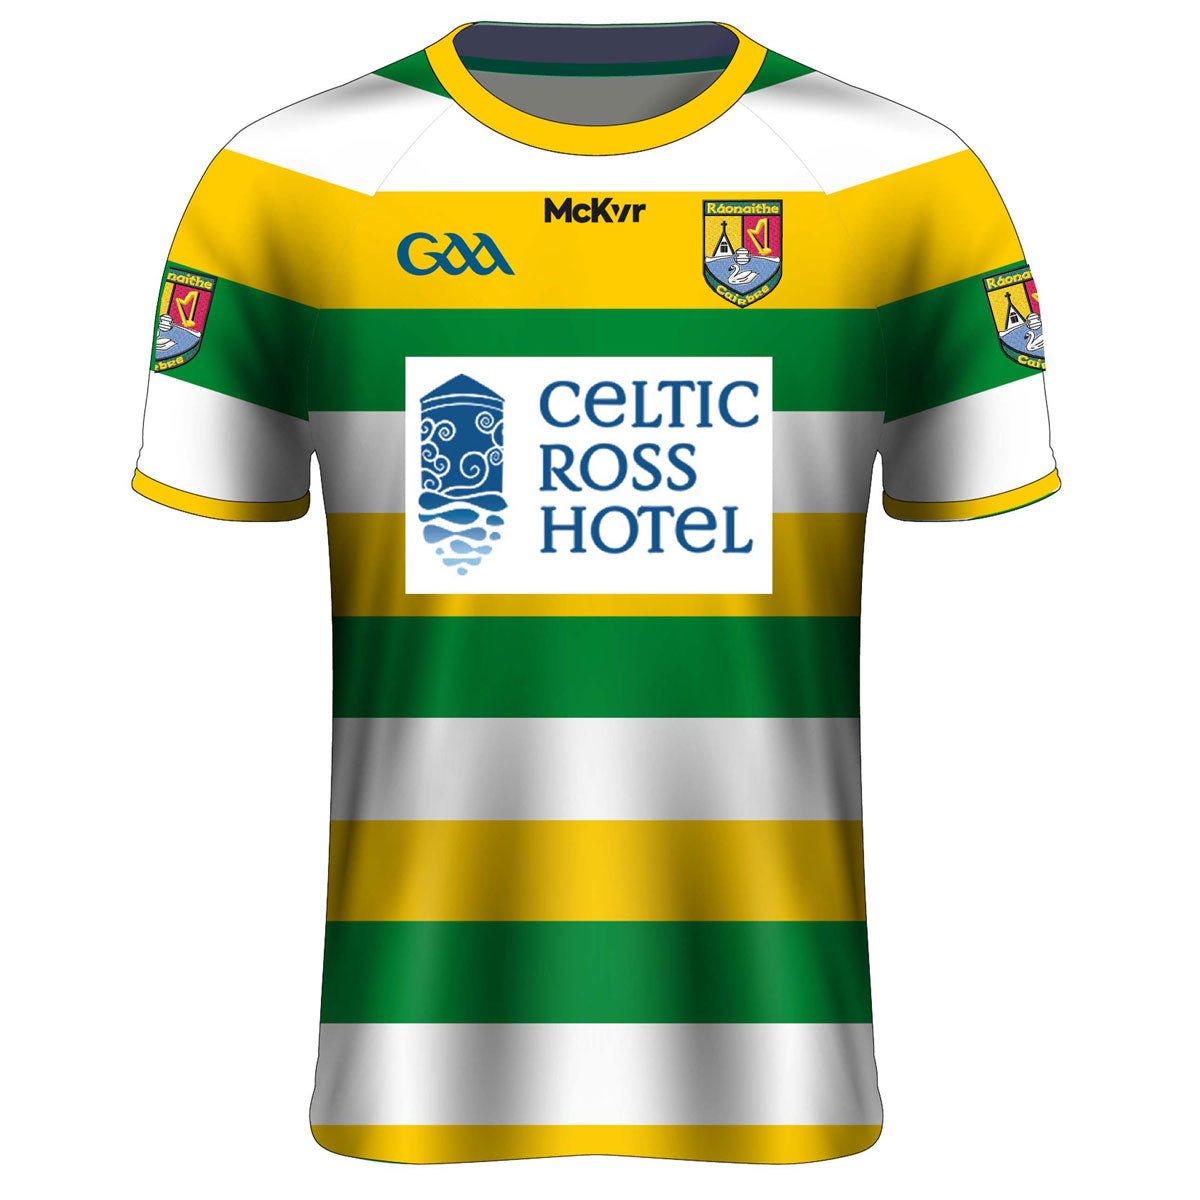 Mc Keever Carbery Rangers Playing Jersey - Youth - Green/Yellow/White